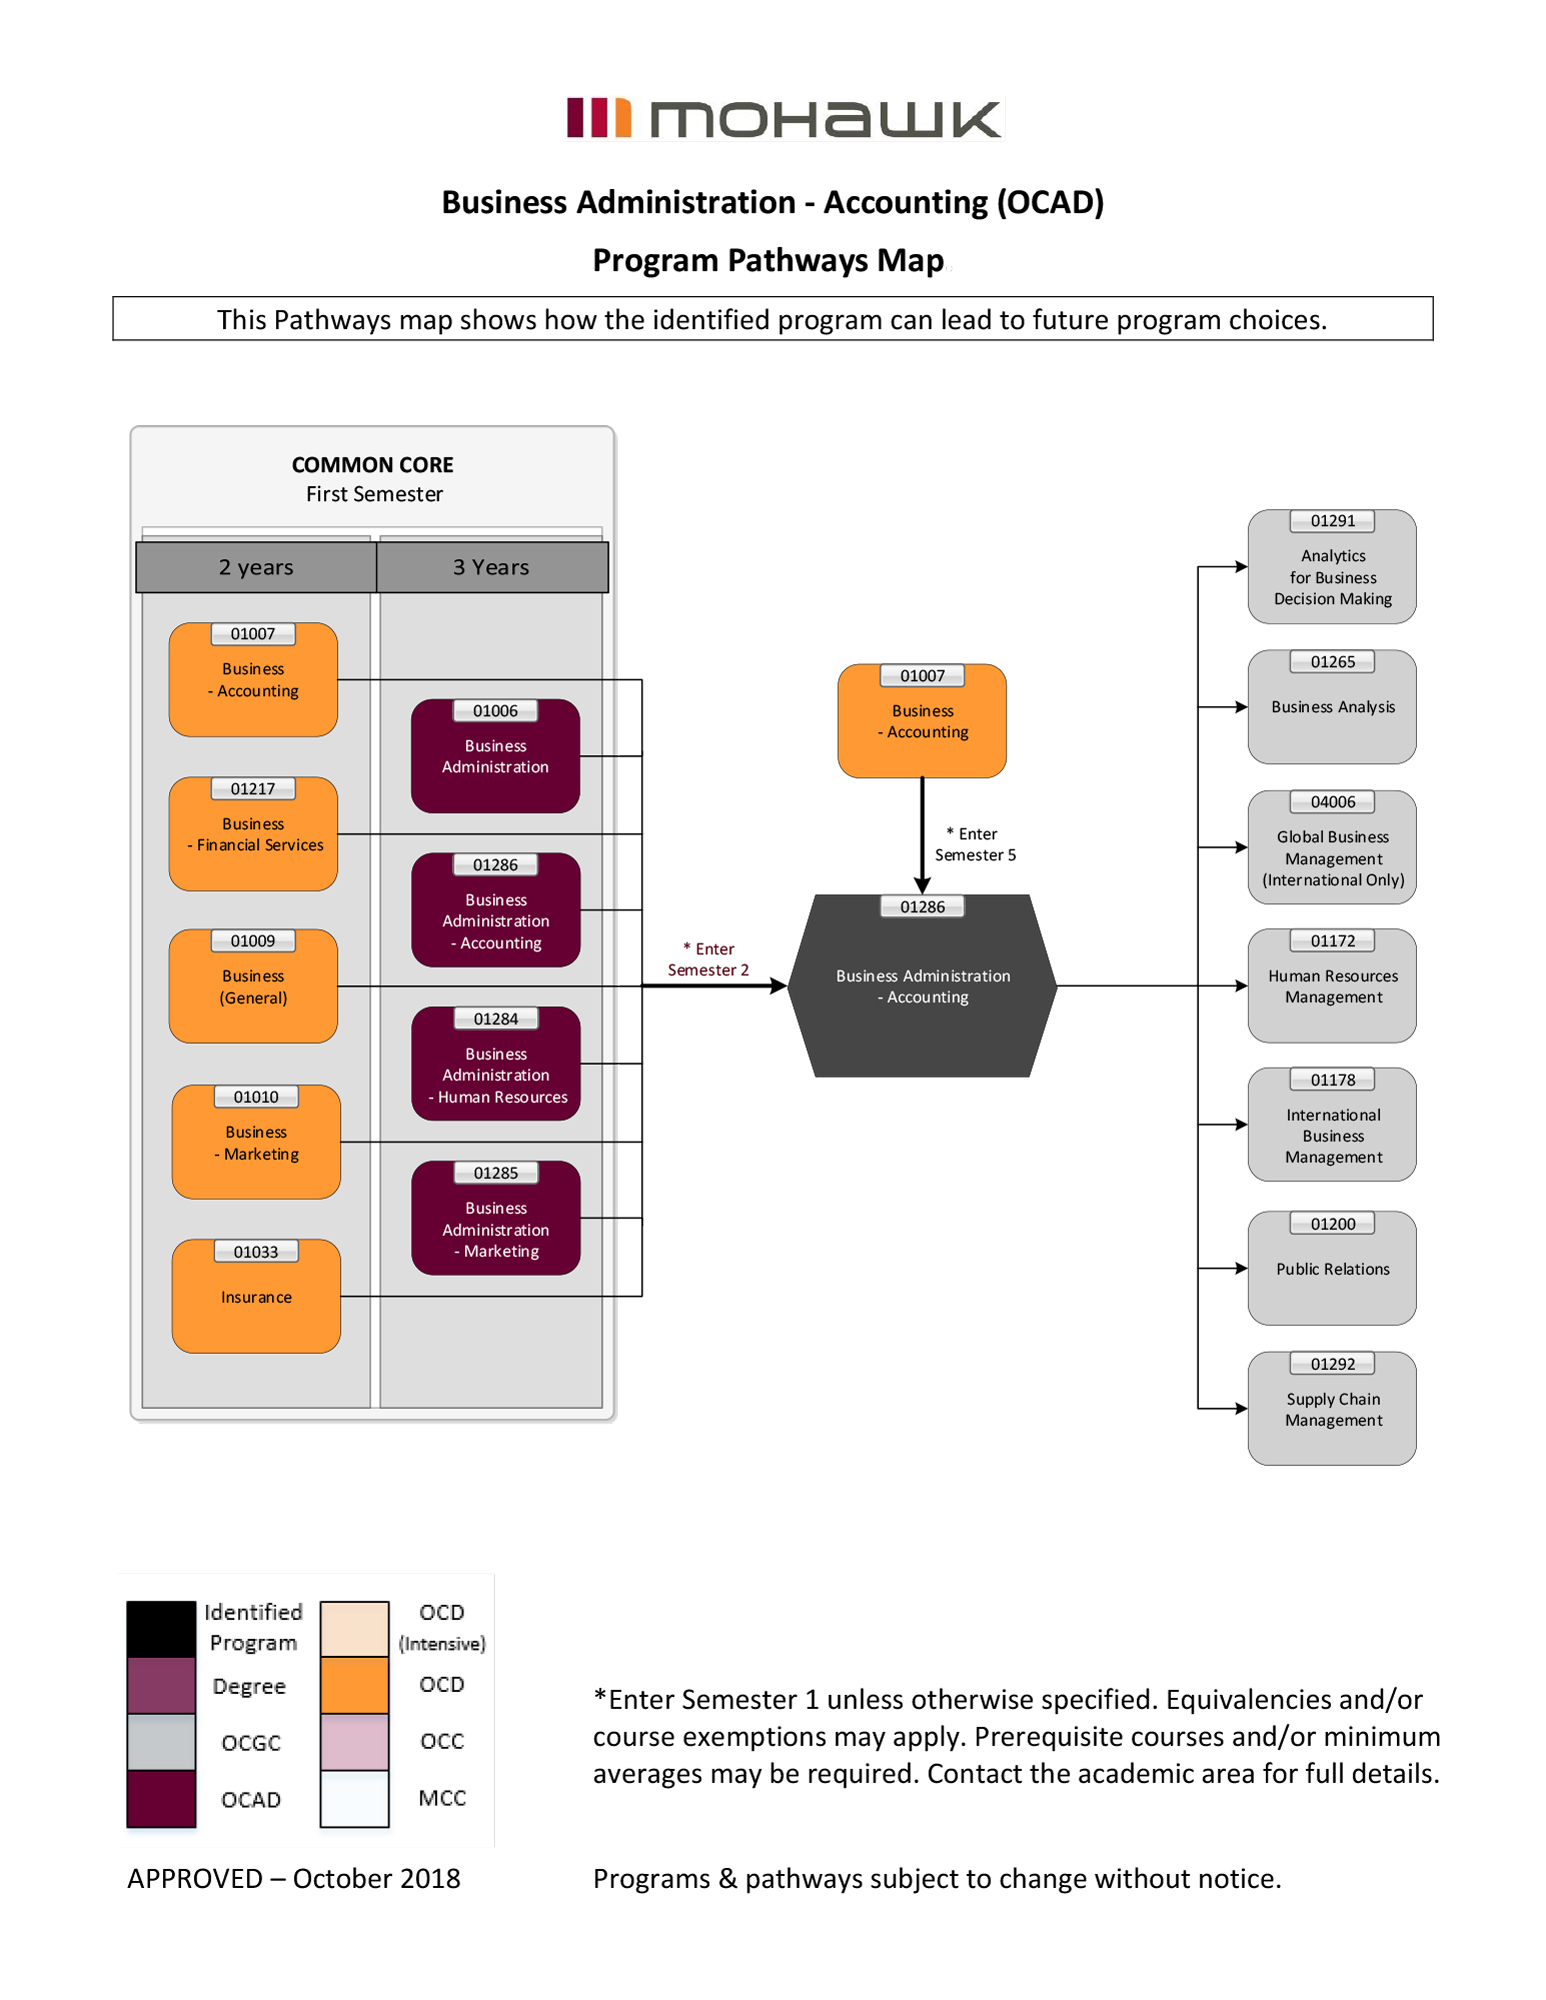 Business Administration Accounting pathways map